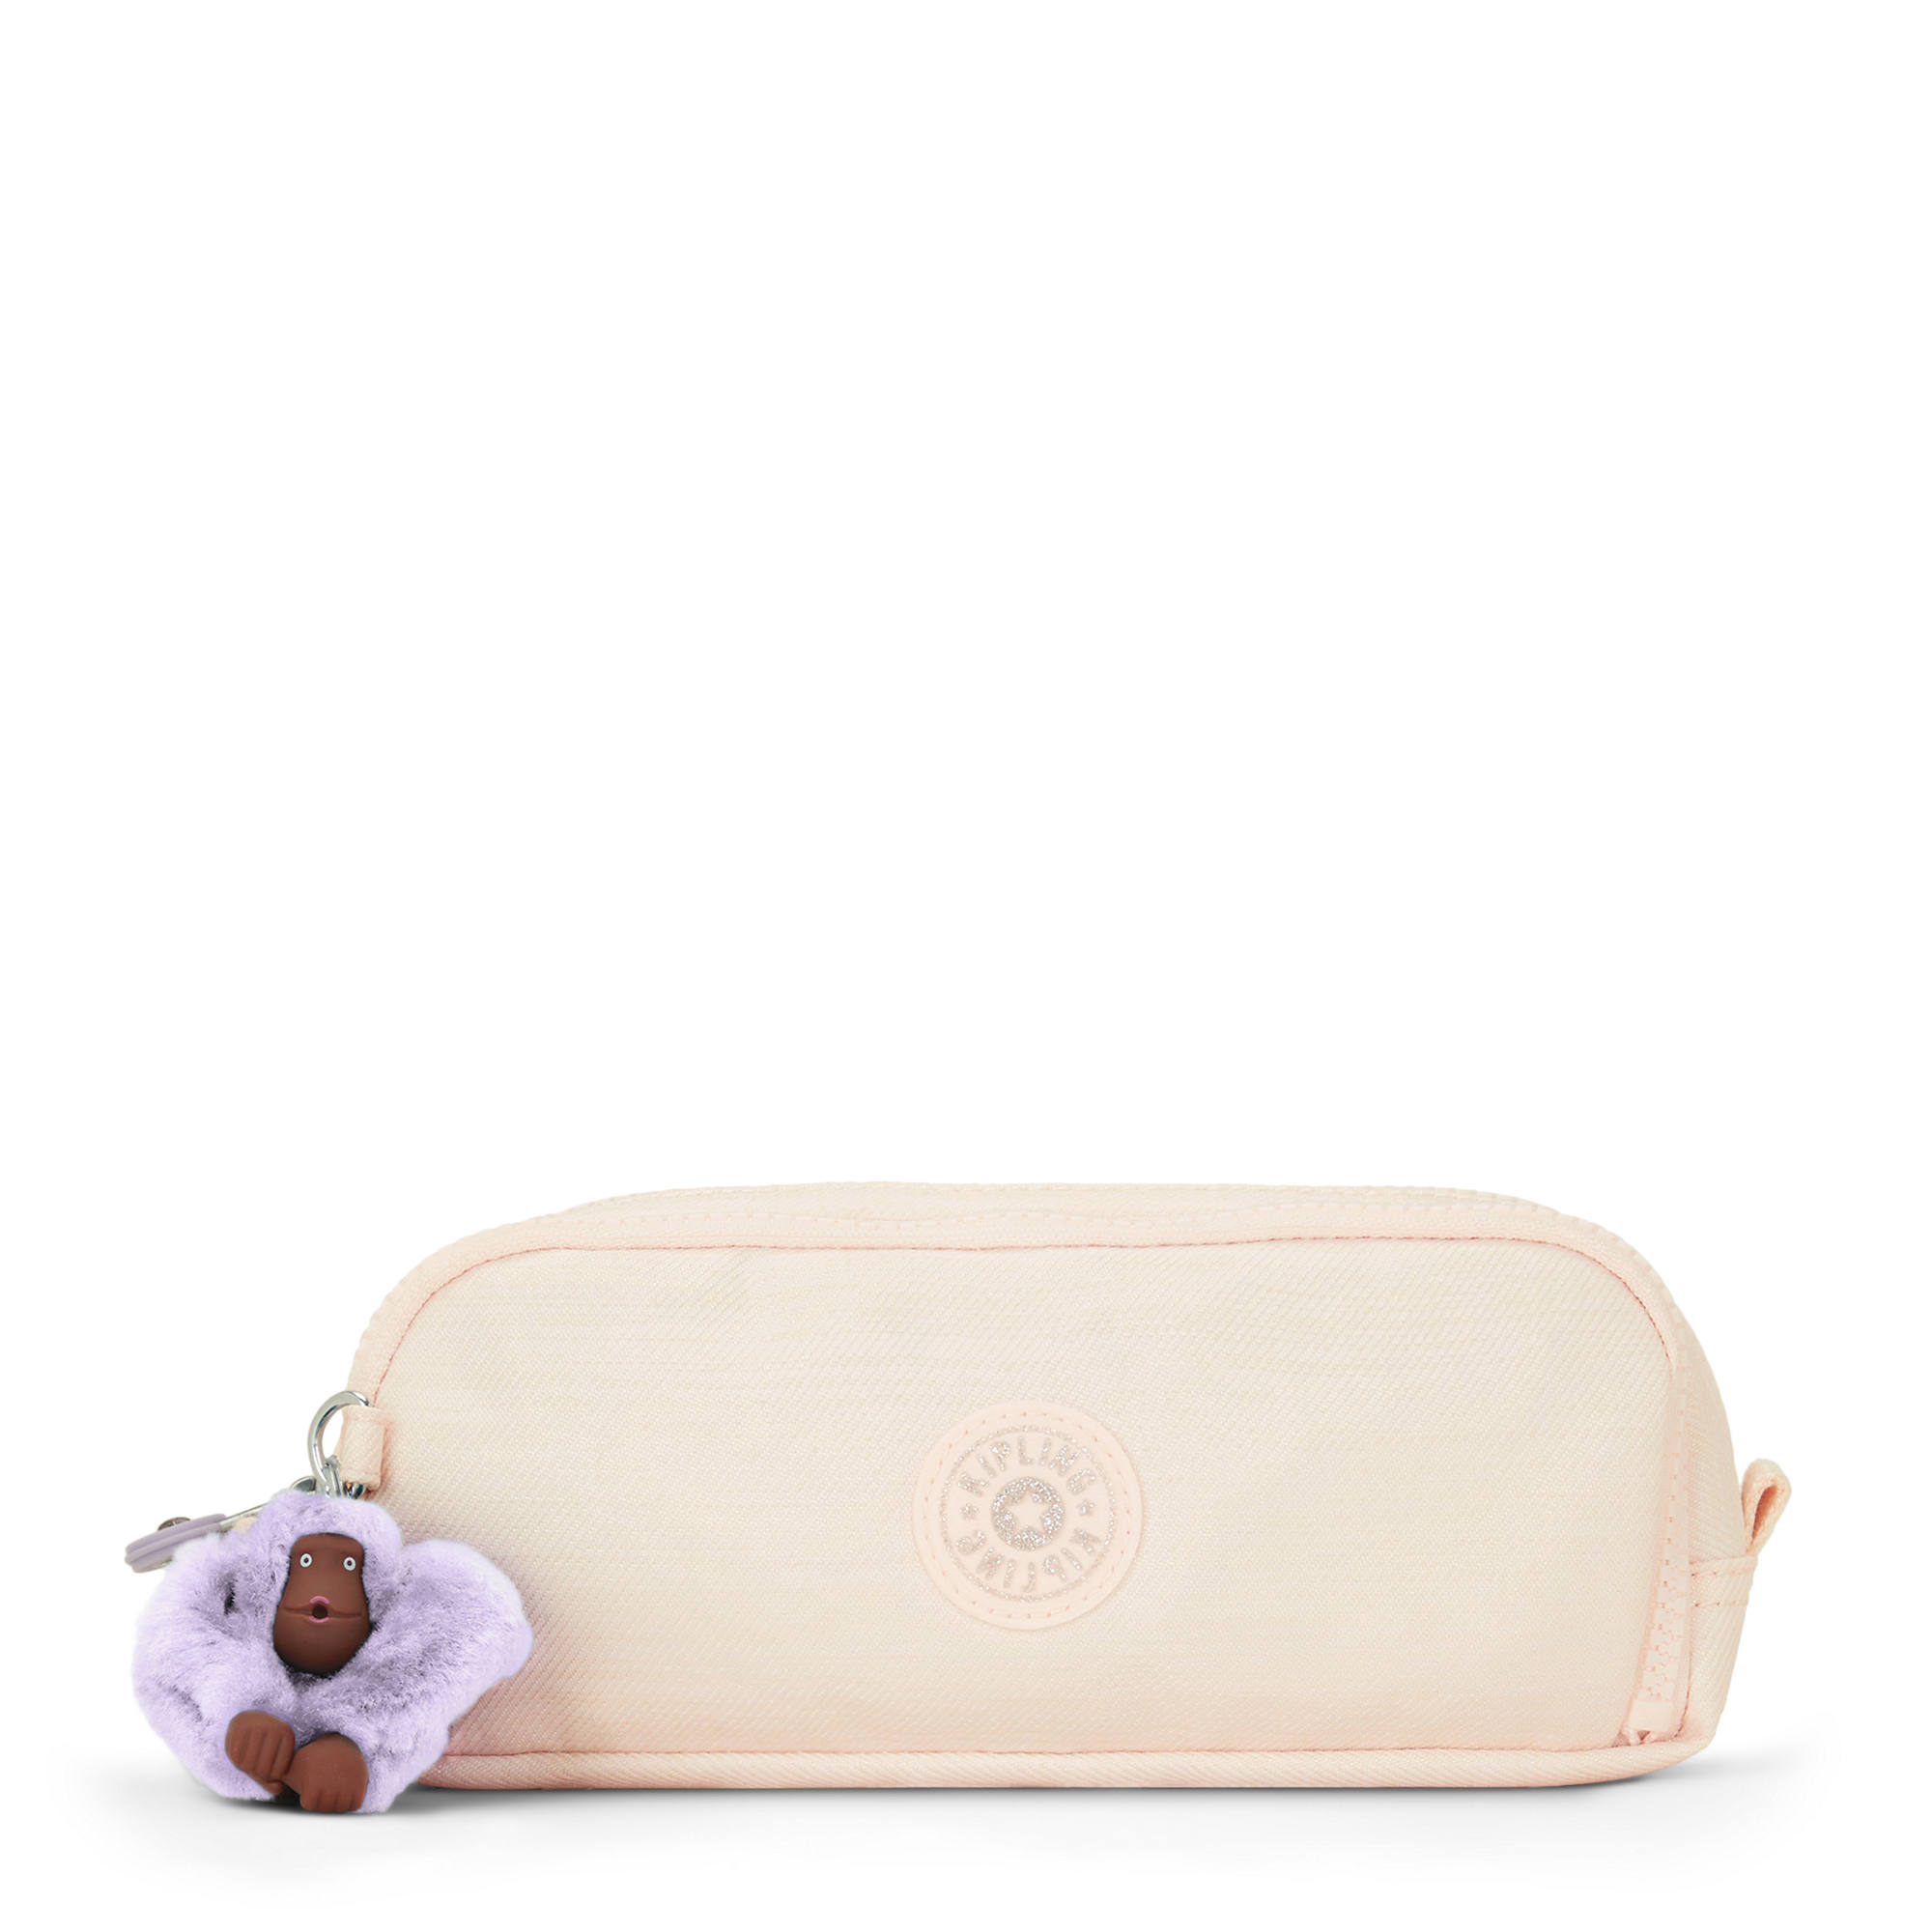 Kipling Pencil Pouch Bags for Women for sale